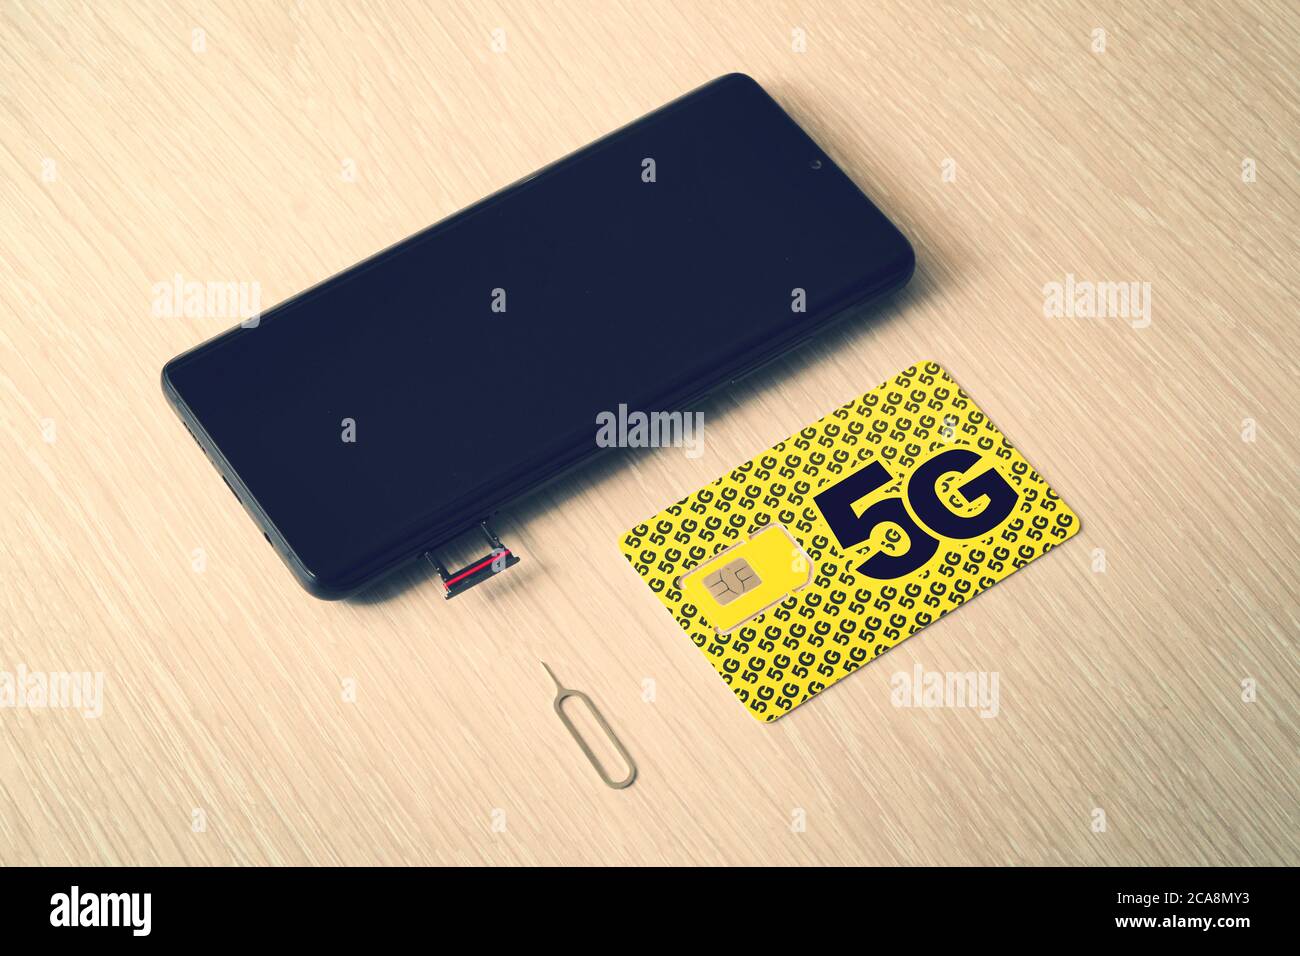 Broadband 5G mobile communication technology concept SIM card tray, dual SIM card slot with two nano SIM cards on wooden background. Stock Photo